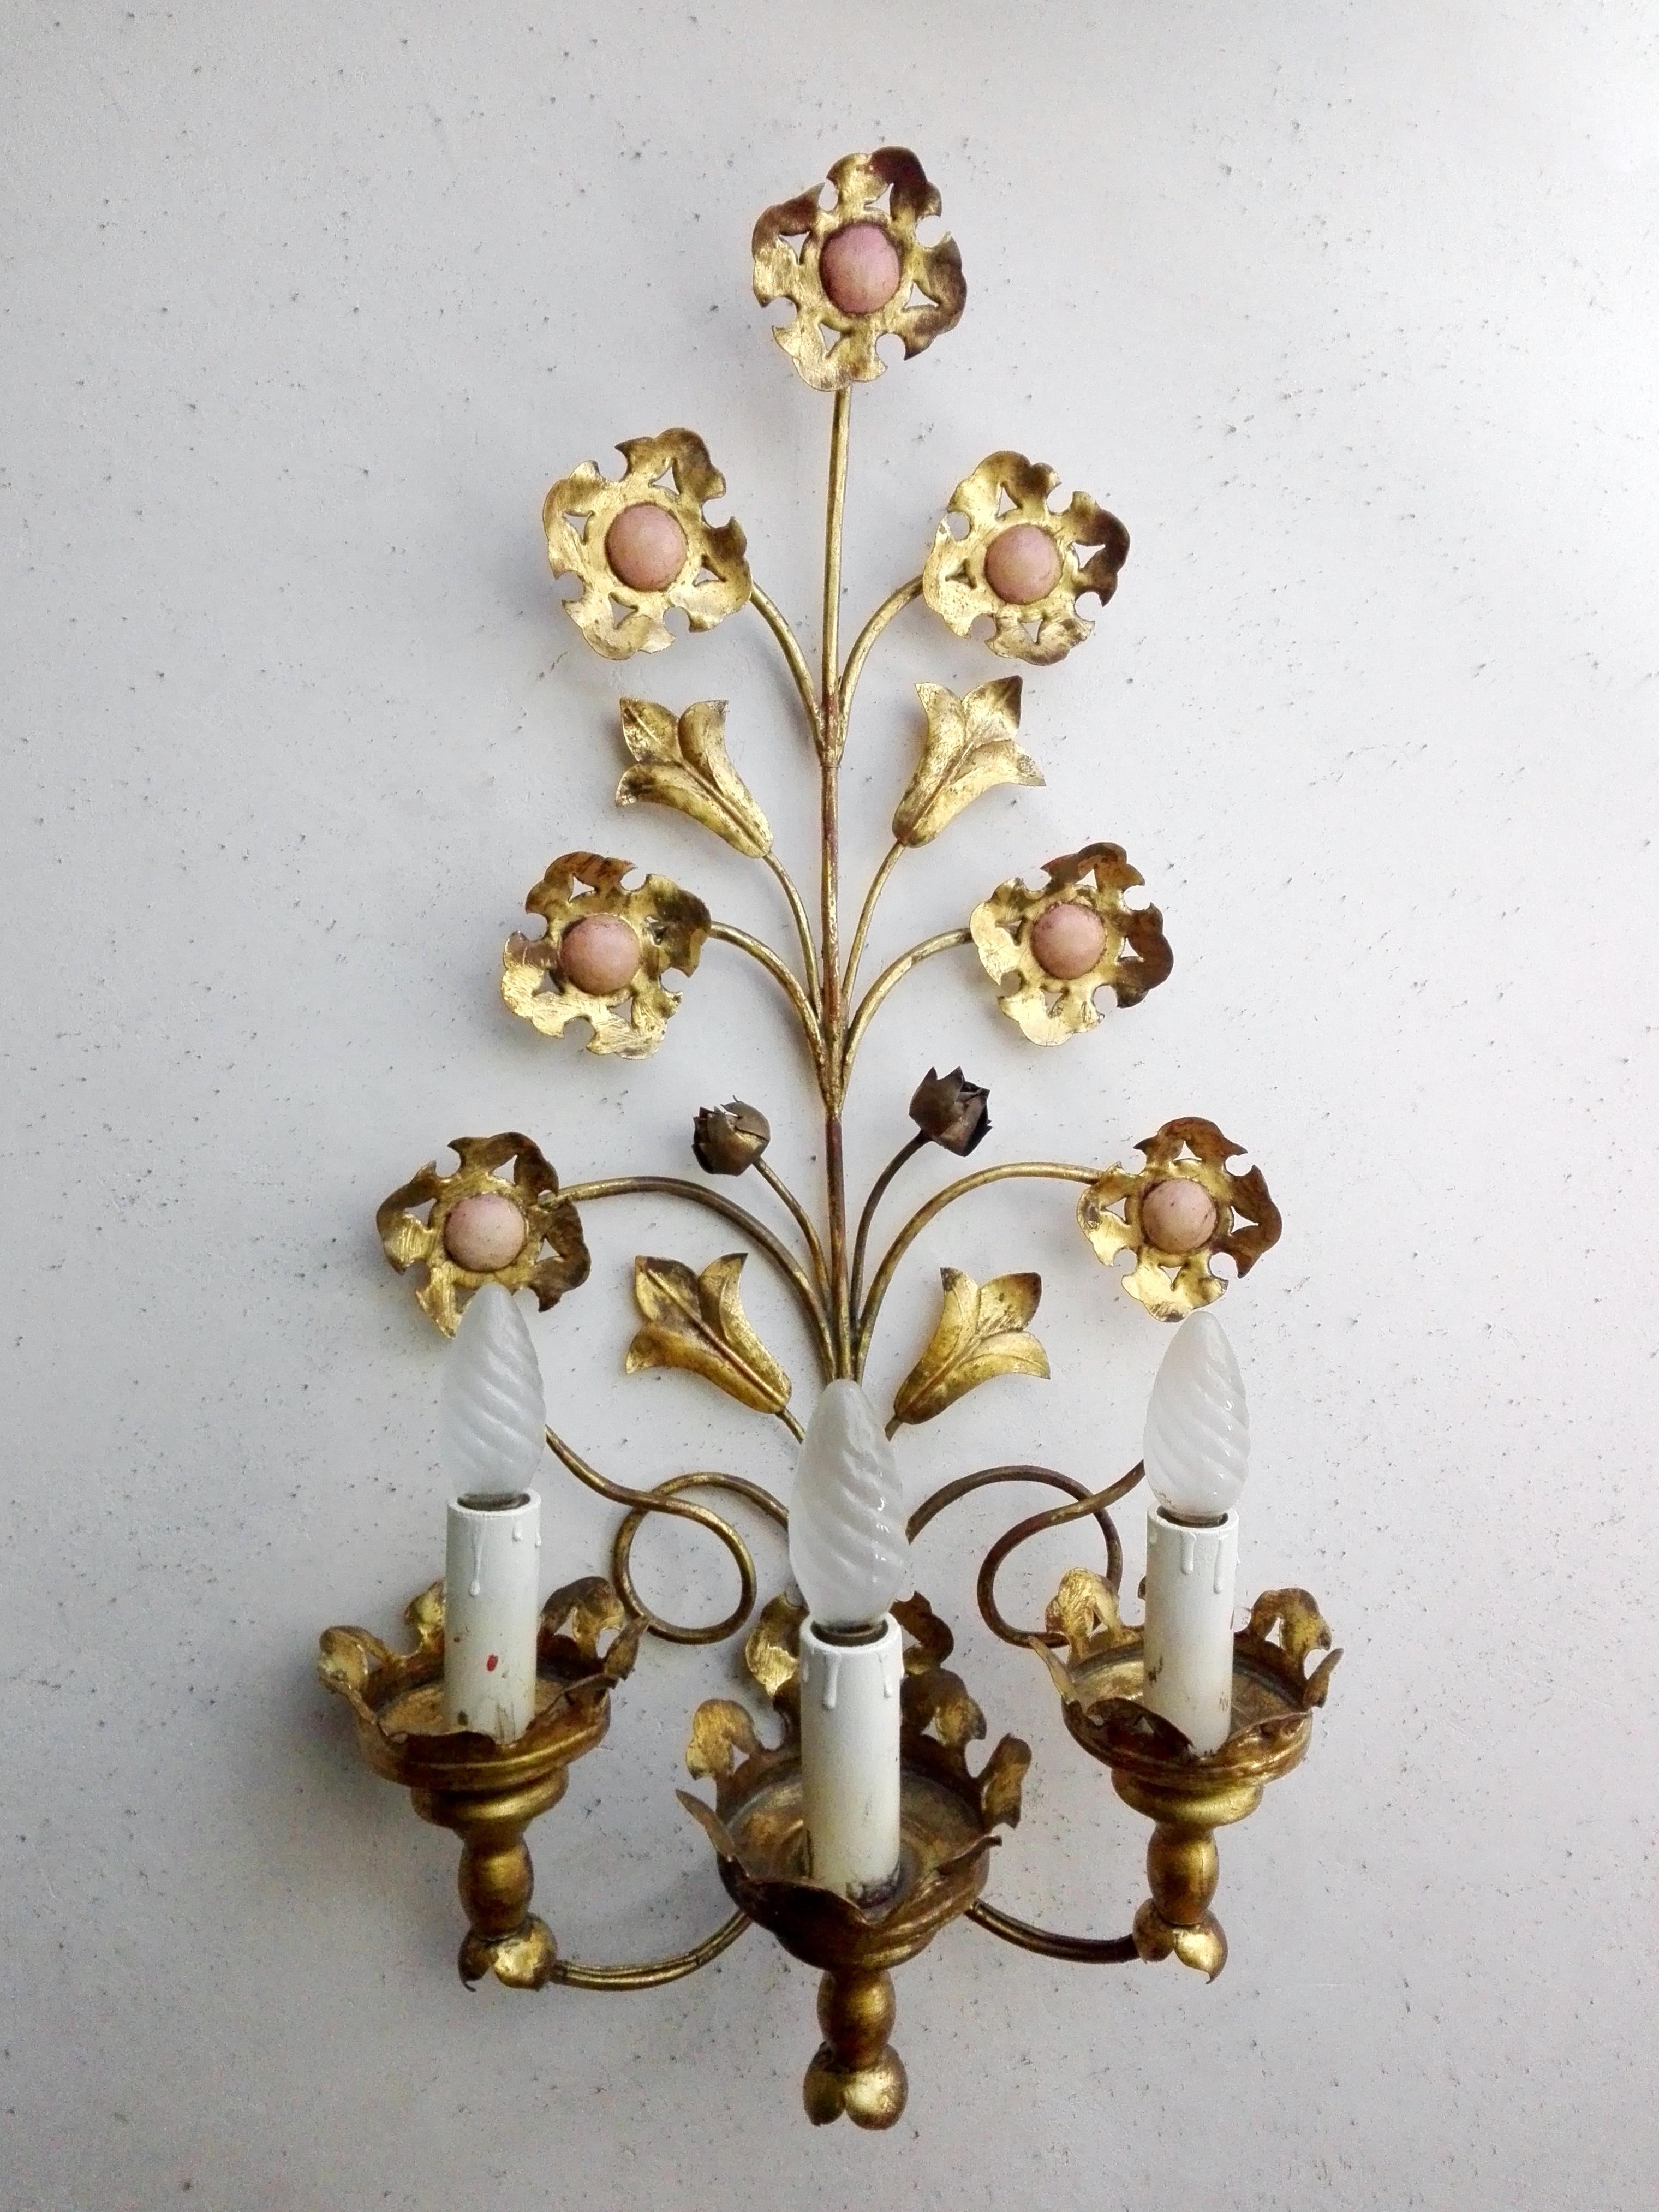 Wonderful Italian 1950s three-light gilt tole wall lamps featuring flowers and leaves in lovely original shape. Traditional Florentine handmade, Hollywood Regency style.
Original wooden candle E14 ( US E12 adaptable) lamp holders.
Bulbs not